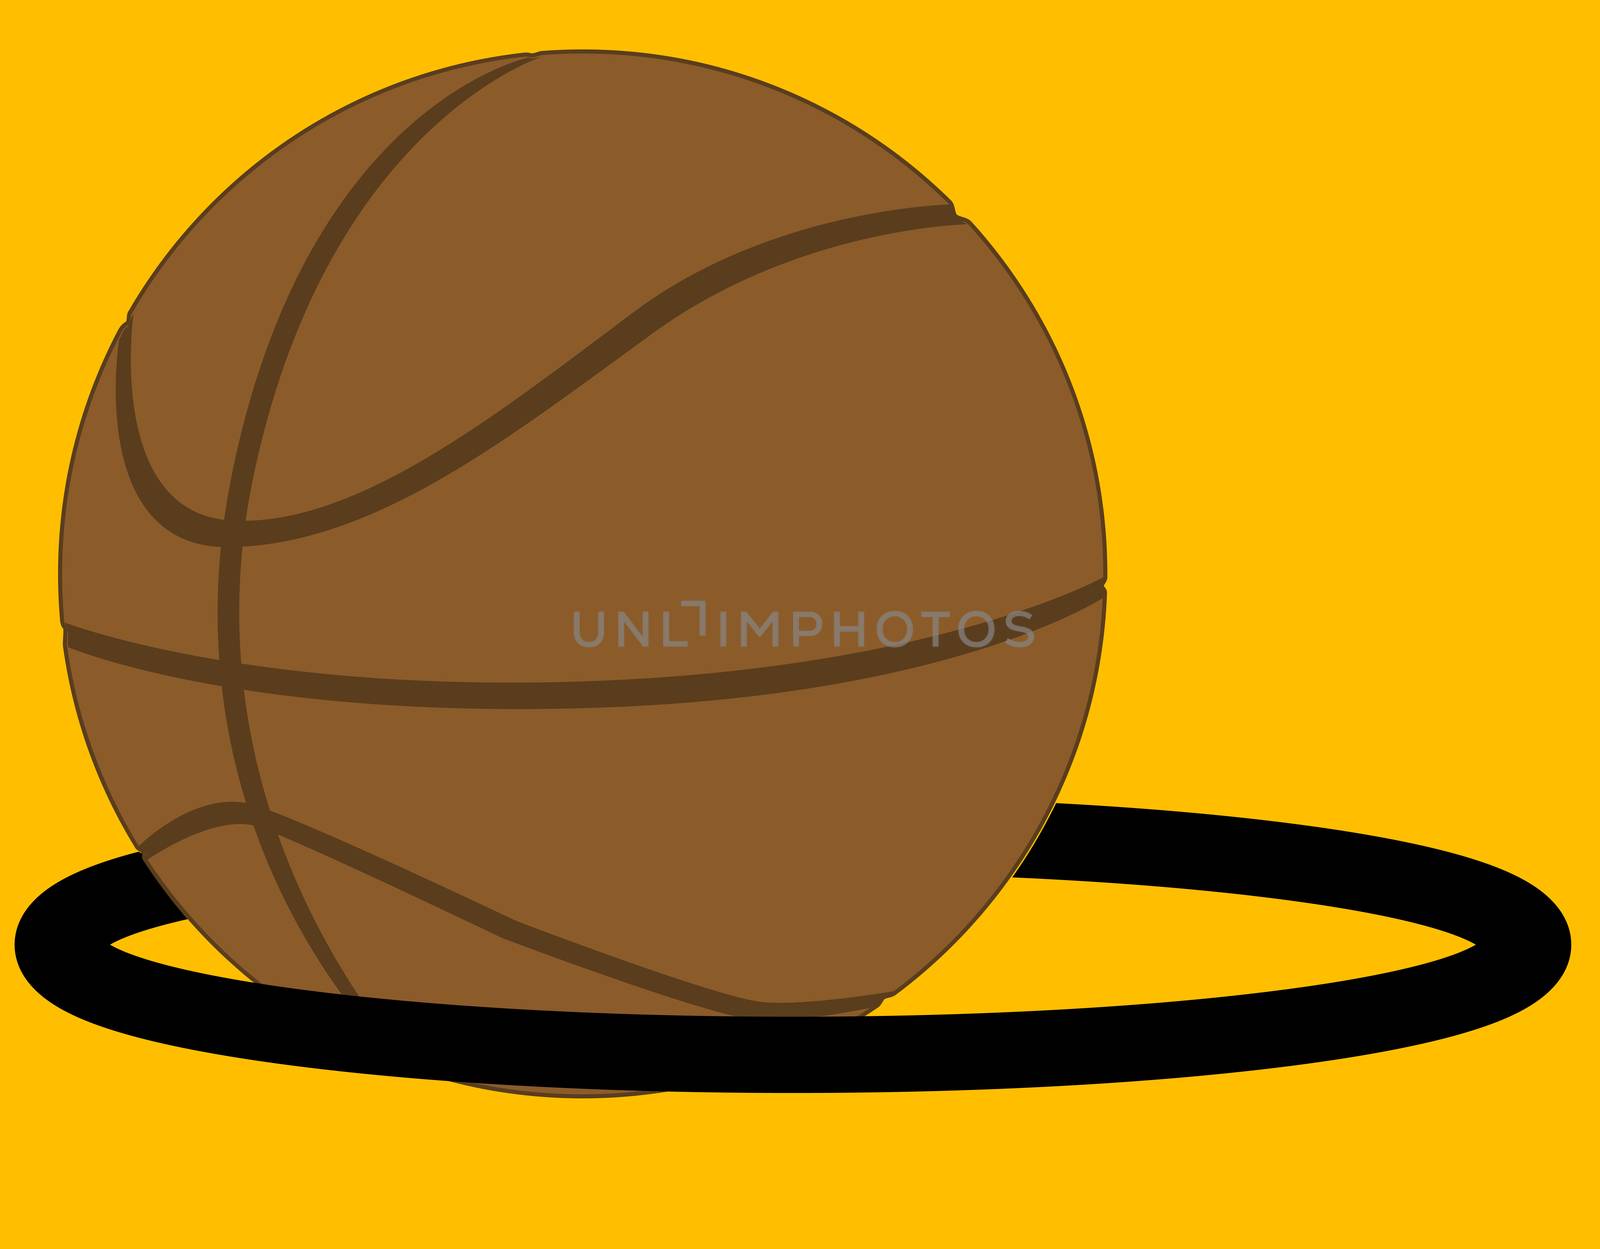 Basketball in isolation going through a hoop